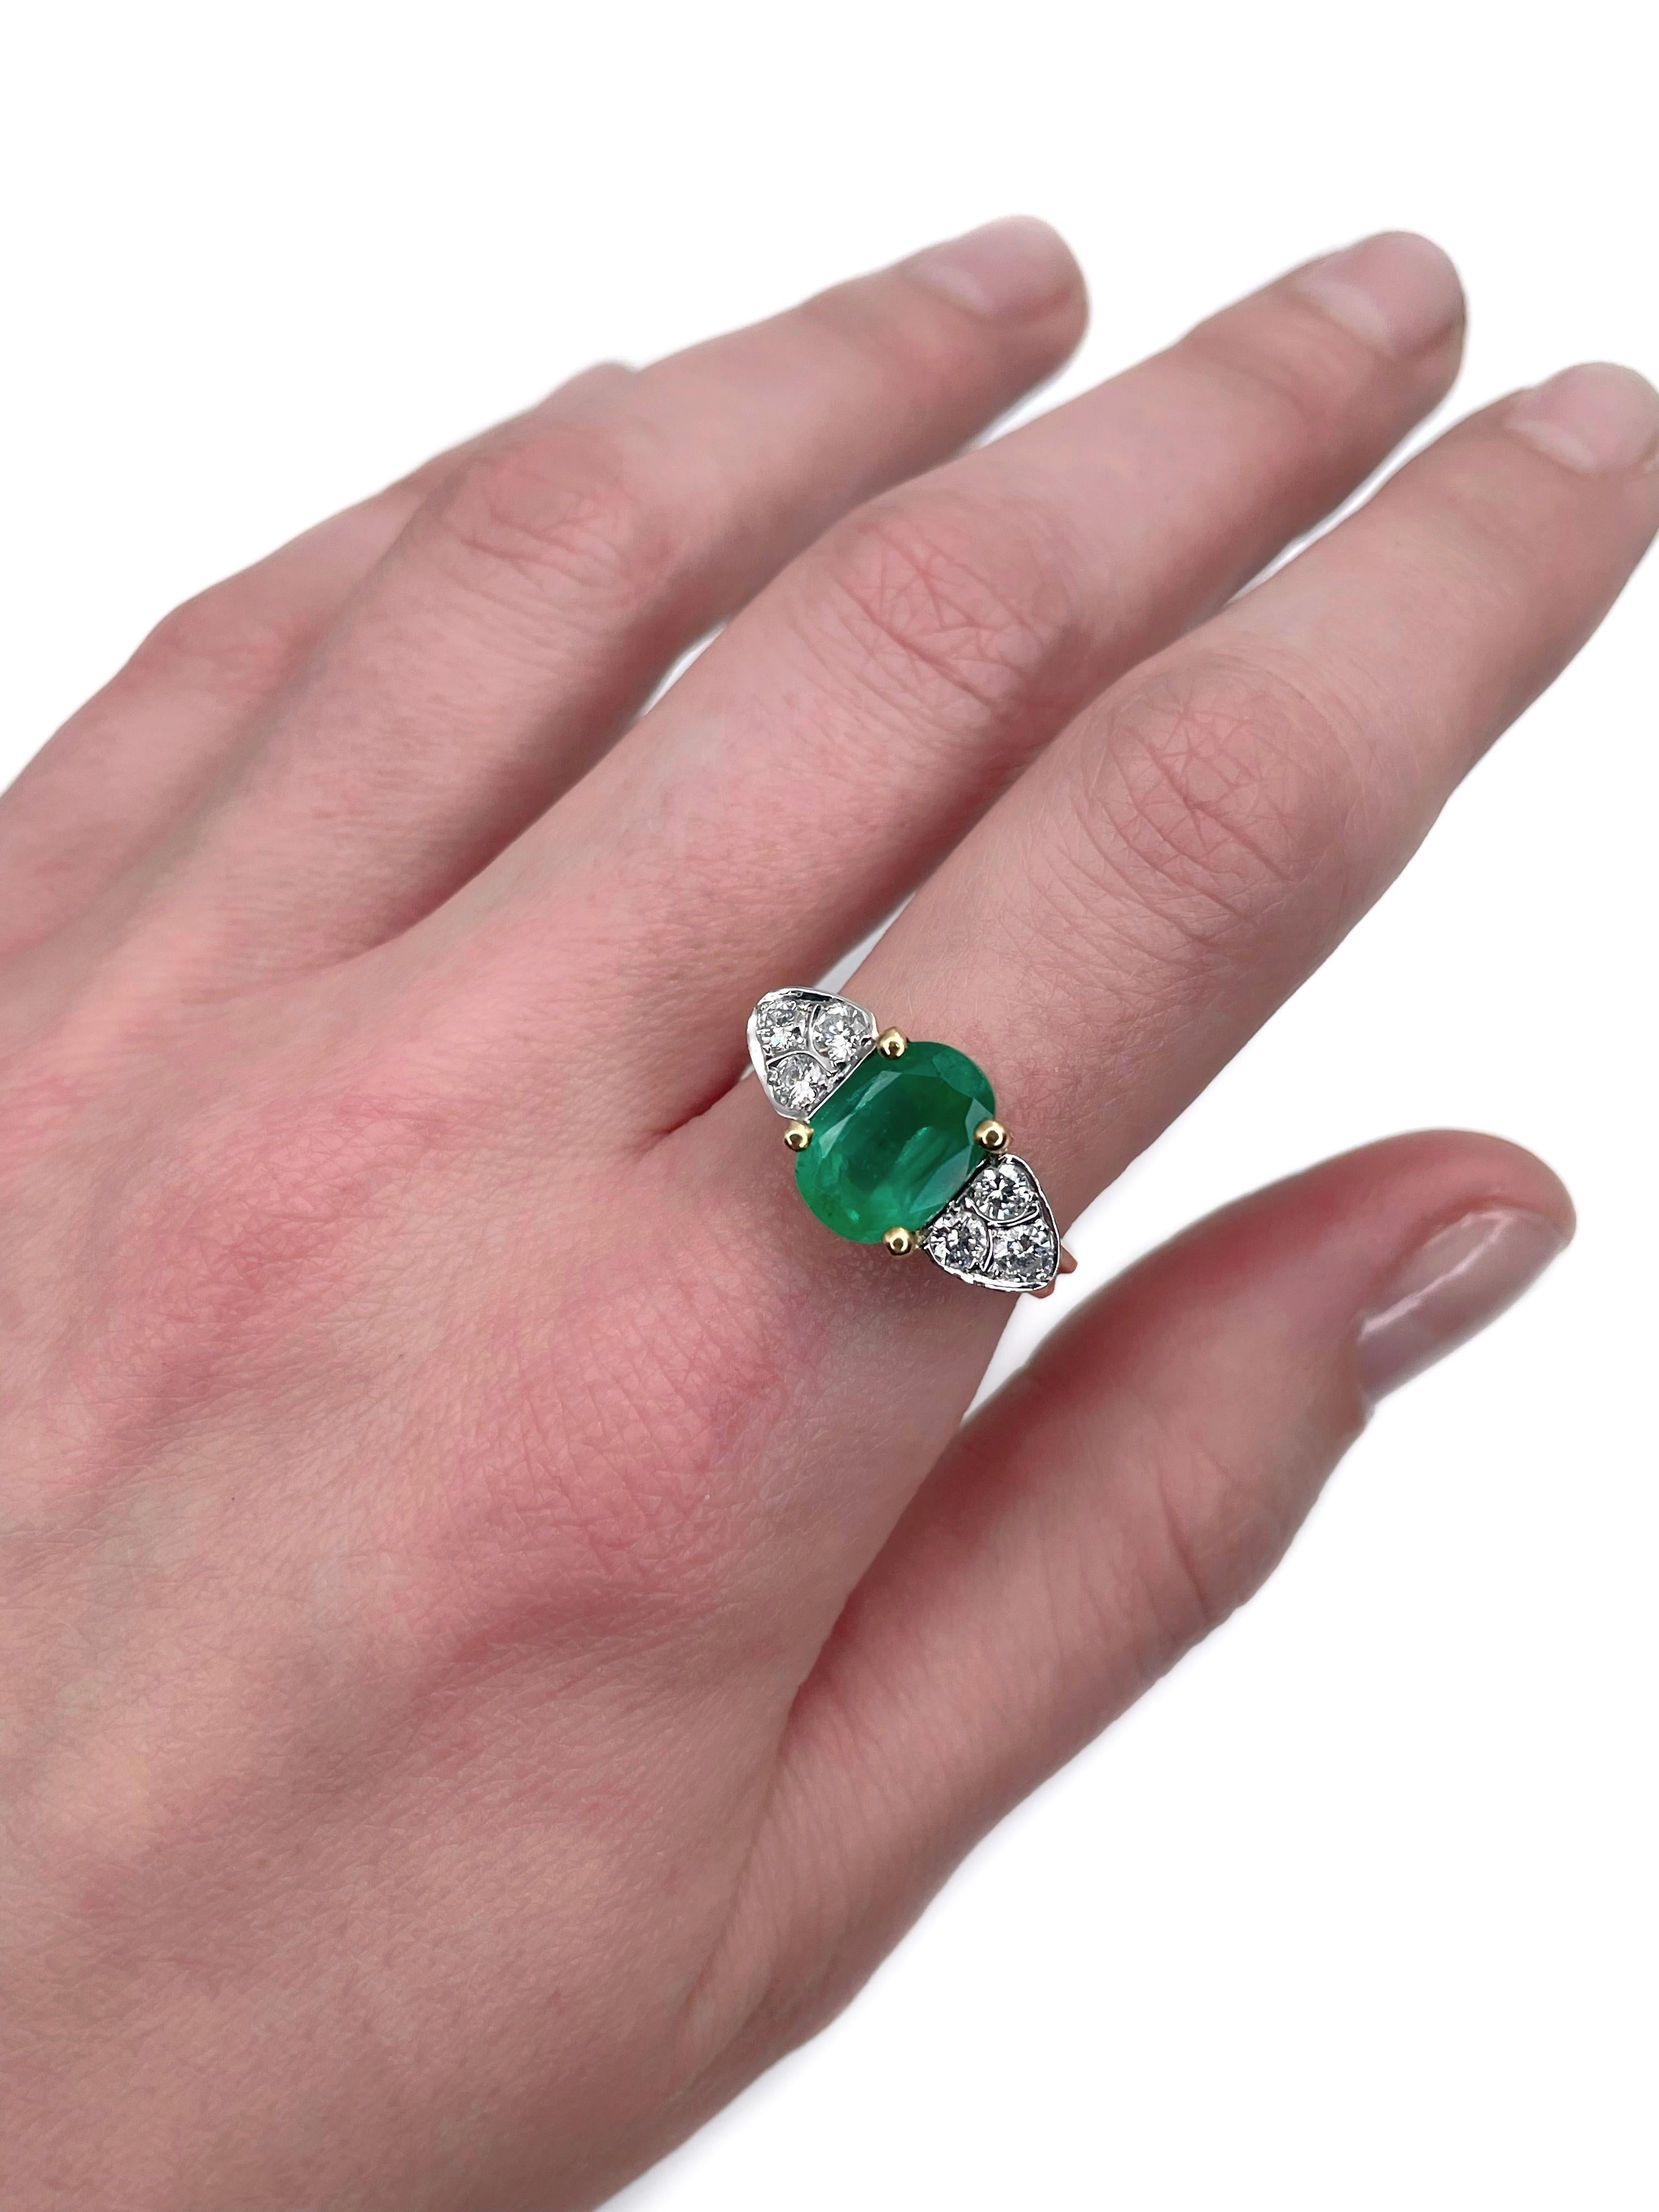 This is a vintage engagement ring crafted in 18K yellow gold. Circa 1980. 

The piece features:
- 1 emerald (oval cut, 2.43ct, F)
- 6 diamonds (round brilliant cut, TW 0.48ct, RW-W, SI-P1)

Weight: 5.65g 
Size: 17.5  (US 7.25)

IMPORTANT: please ask